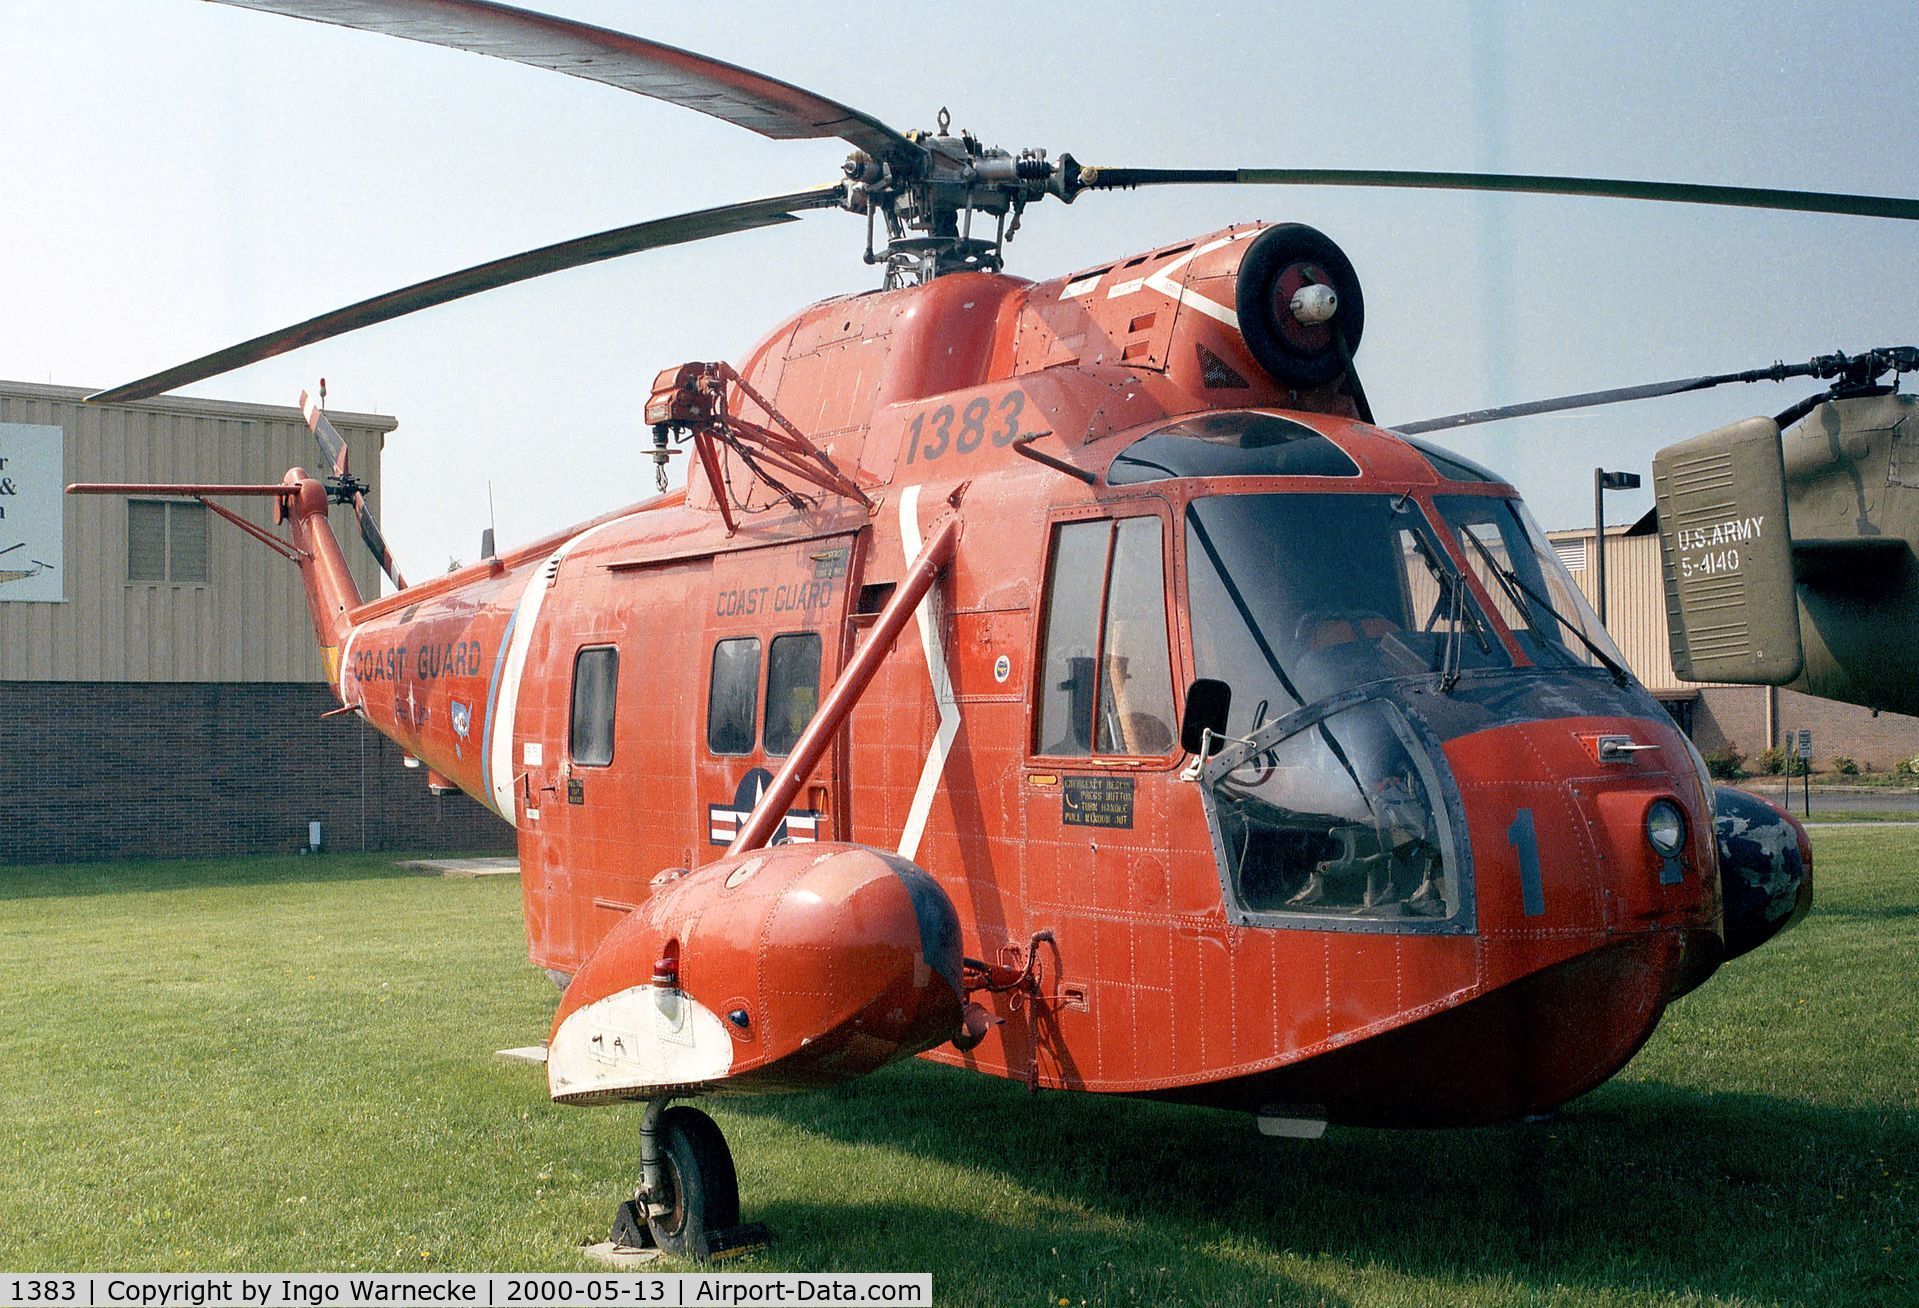 1383, 1964 Sikorsky HH-52A Sea Guard C/N 62.064, Sikorsky HH-52A (S-62) at the American Helicopter Museum, West Chester PA